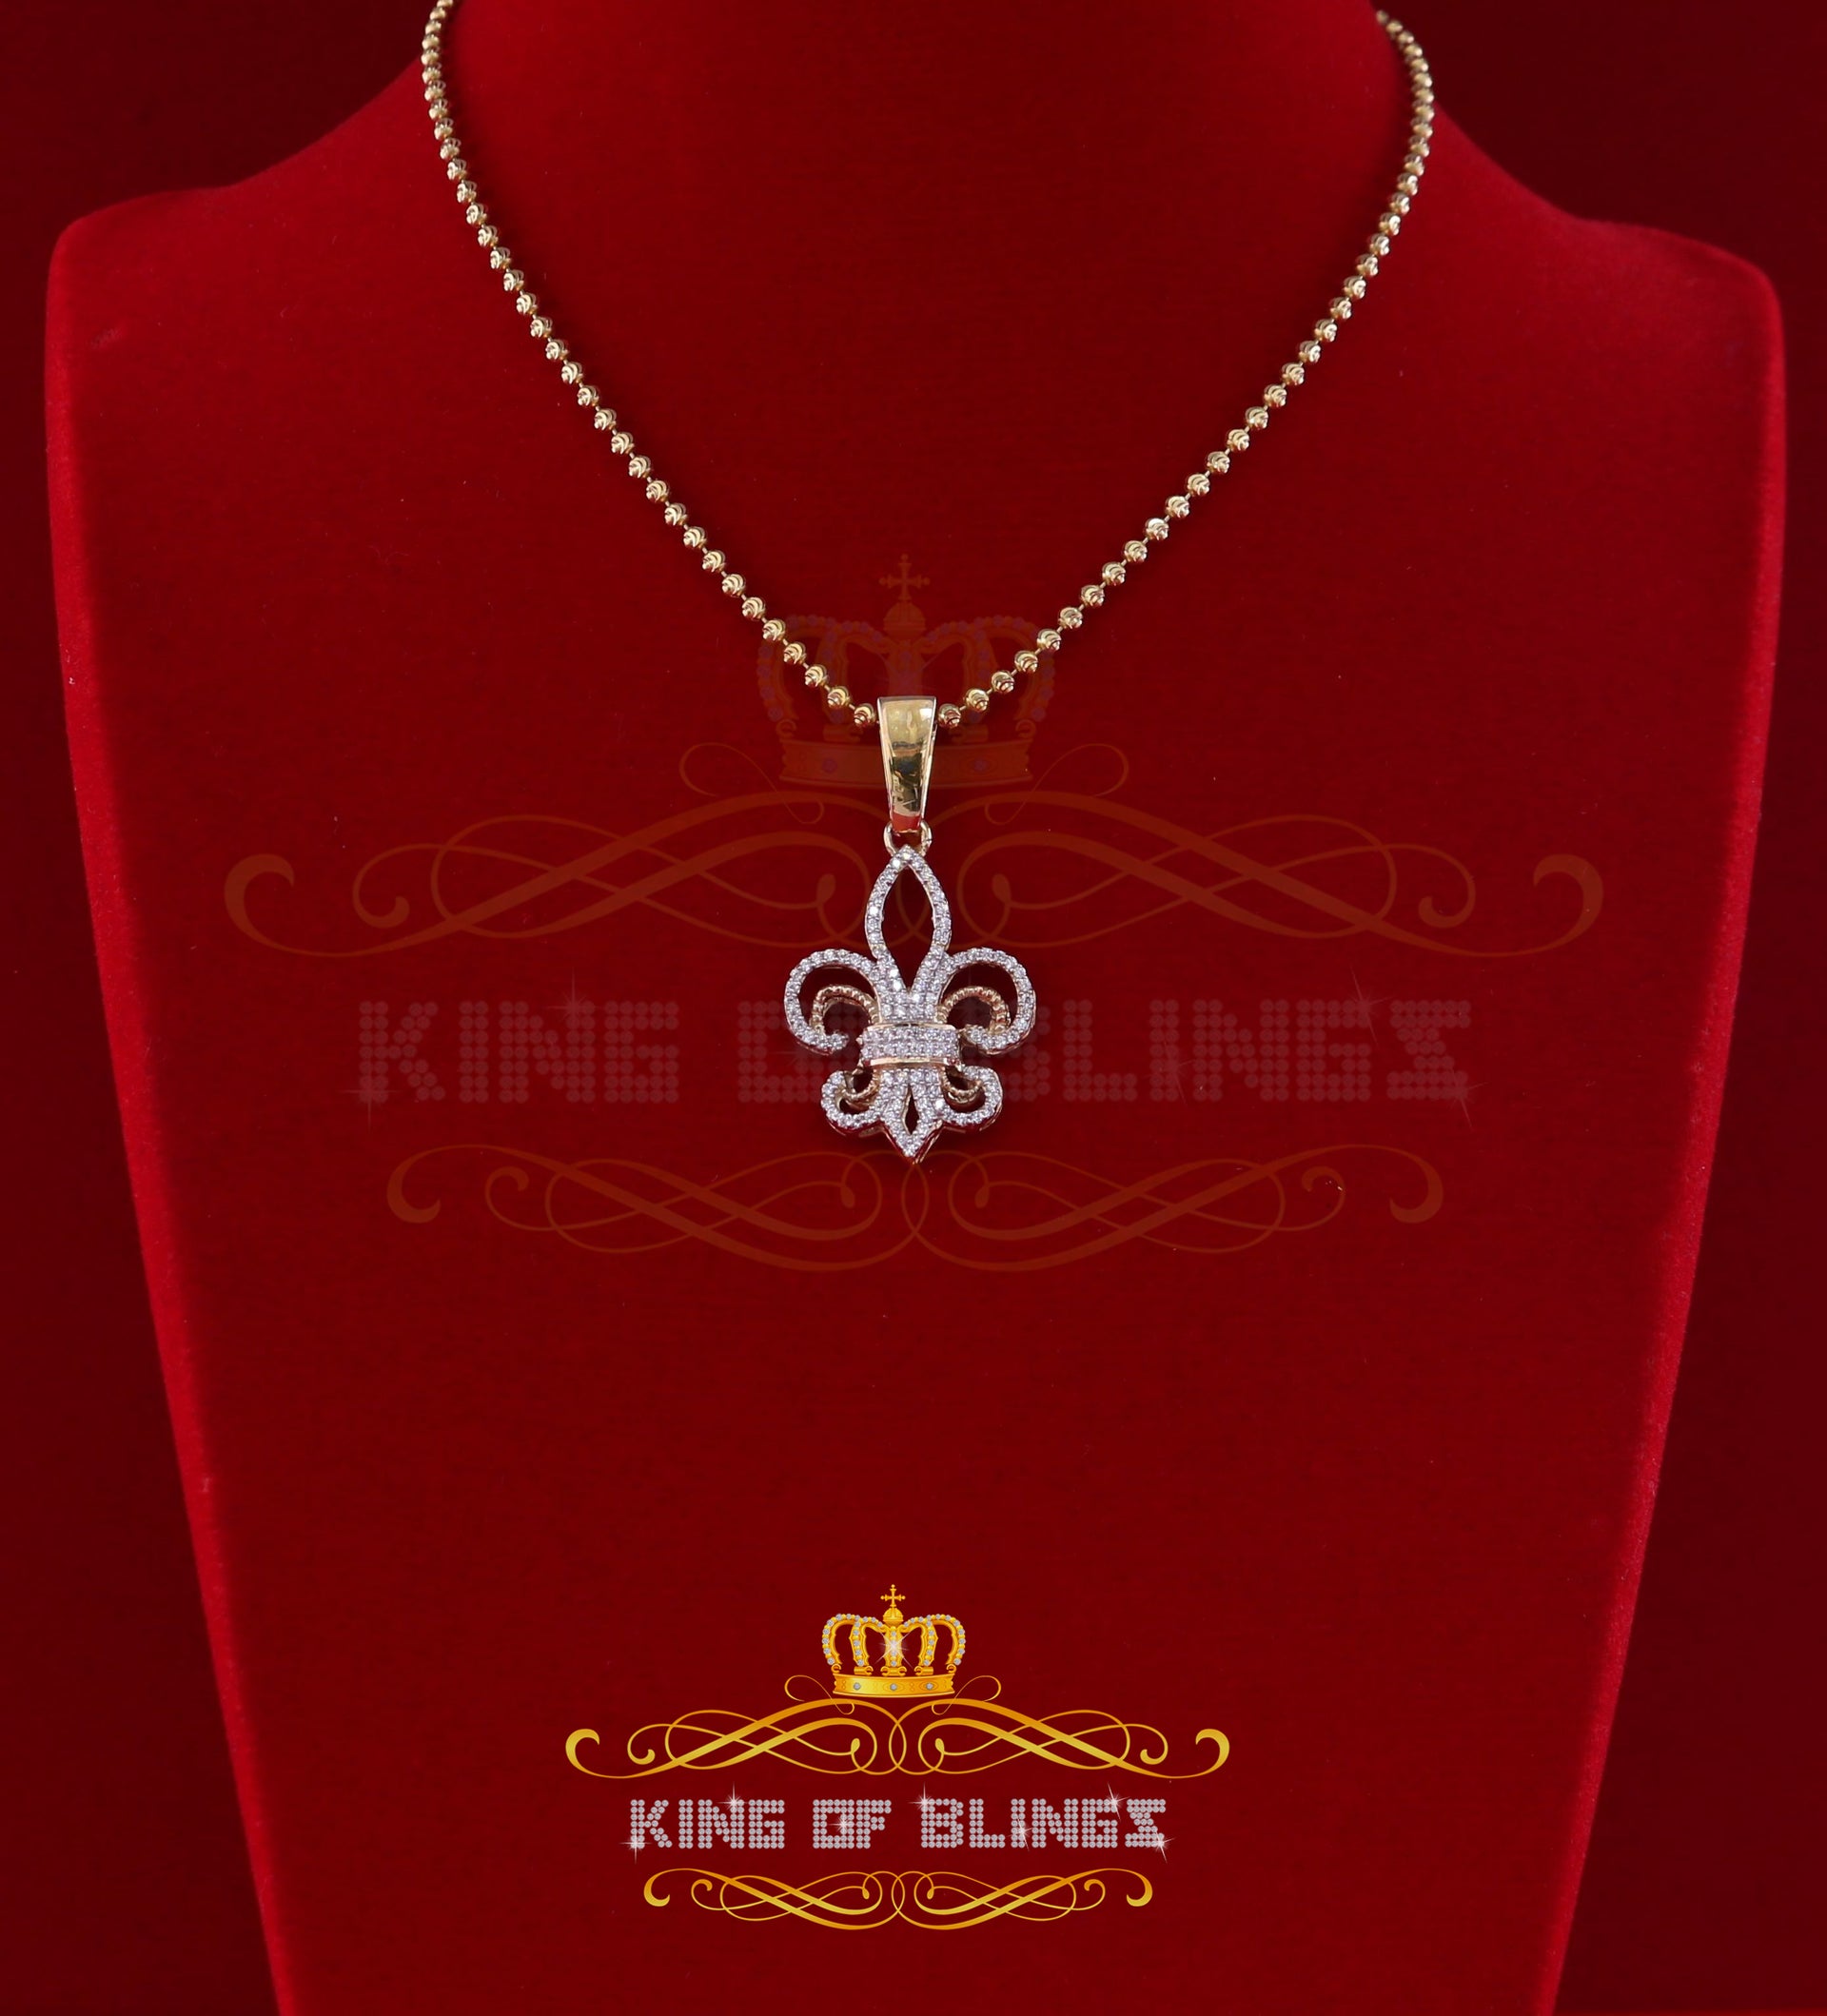 Yellow 925 Sterling Silver Fleur de Lis Pendant with 0.93ct Cubic Zirconia Stone KING OF BLINGS